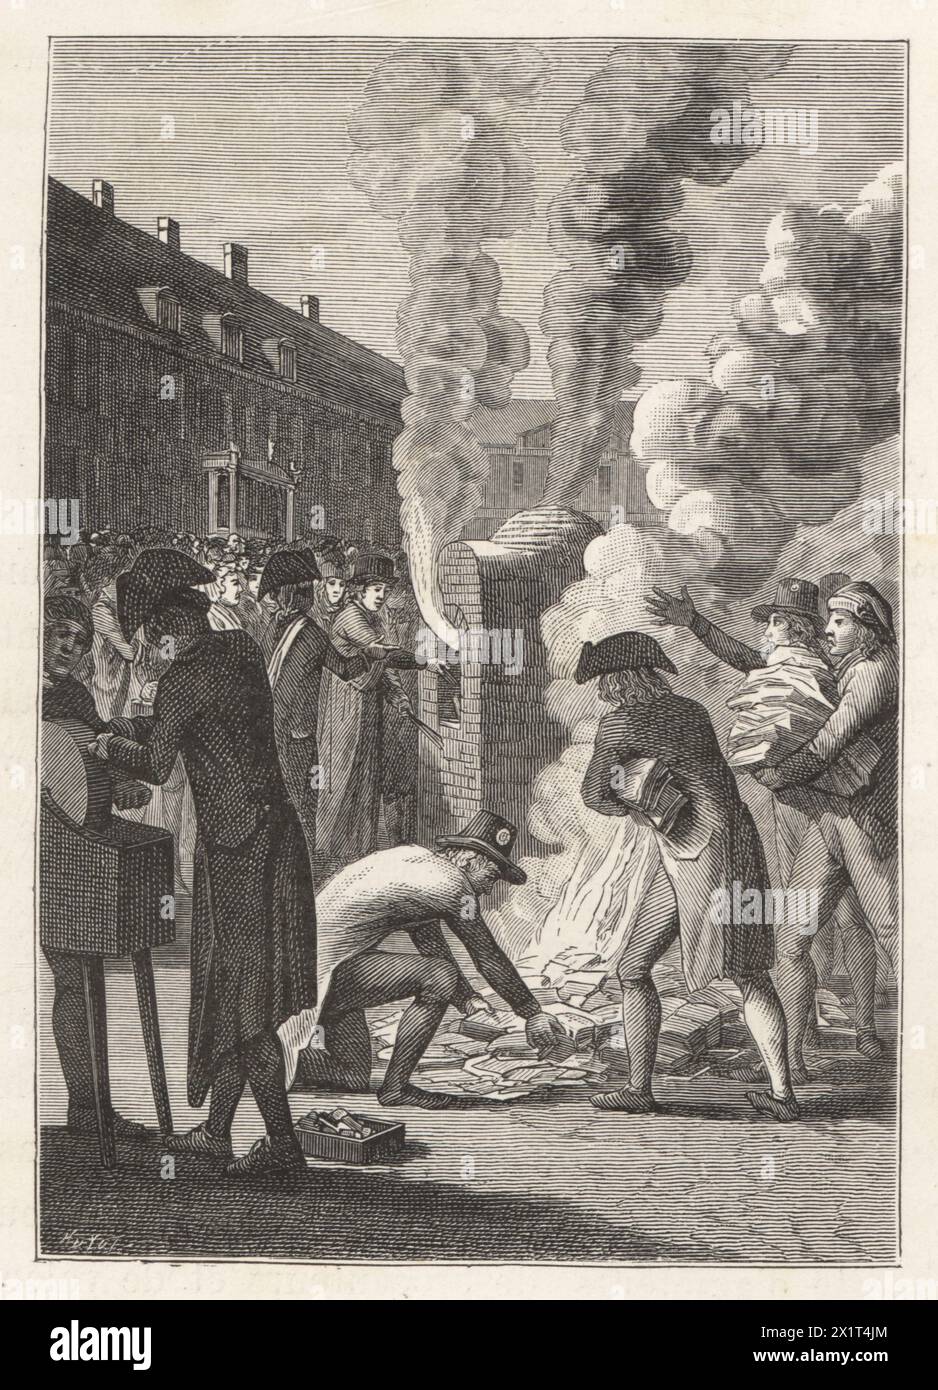 French officials burning assignats (promissory notes) after the failure of the currency, 19 February 1796, French Directory era. On brule les assignats a Paris, 19 fevrier 1796. Woodcut by Huyot after a German engraving from Paul Lacroix's Directoire, Consulat et Empire, (Directory, Consulate and Empire), Paris, 1884. Stock Photo